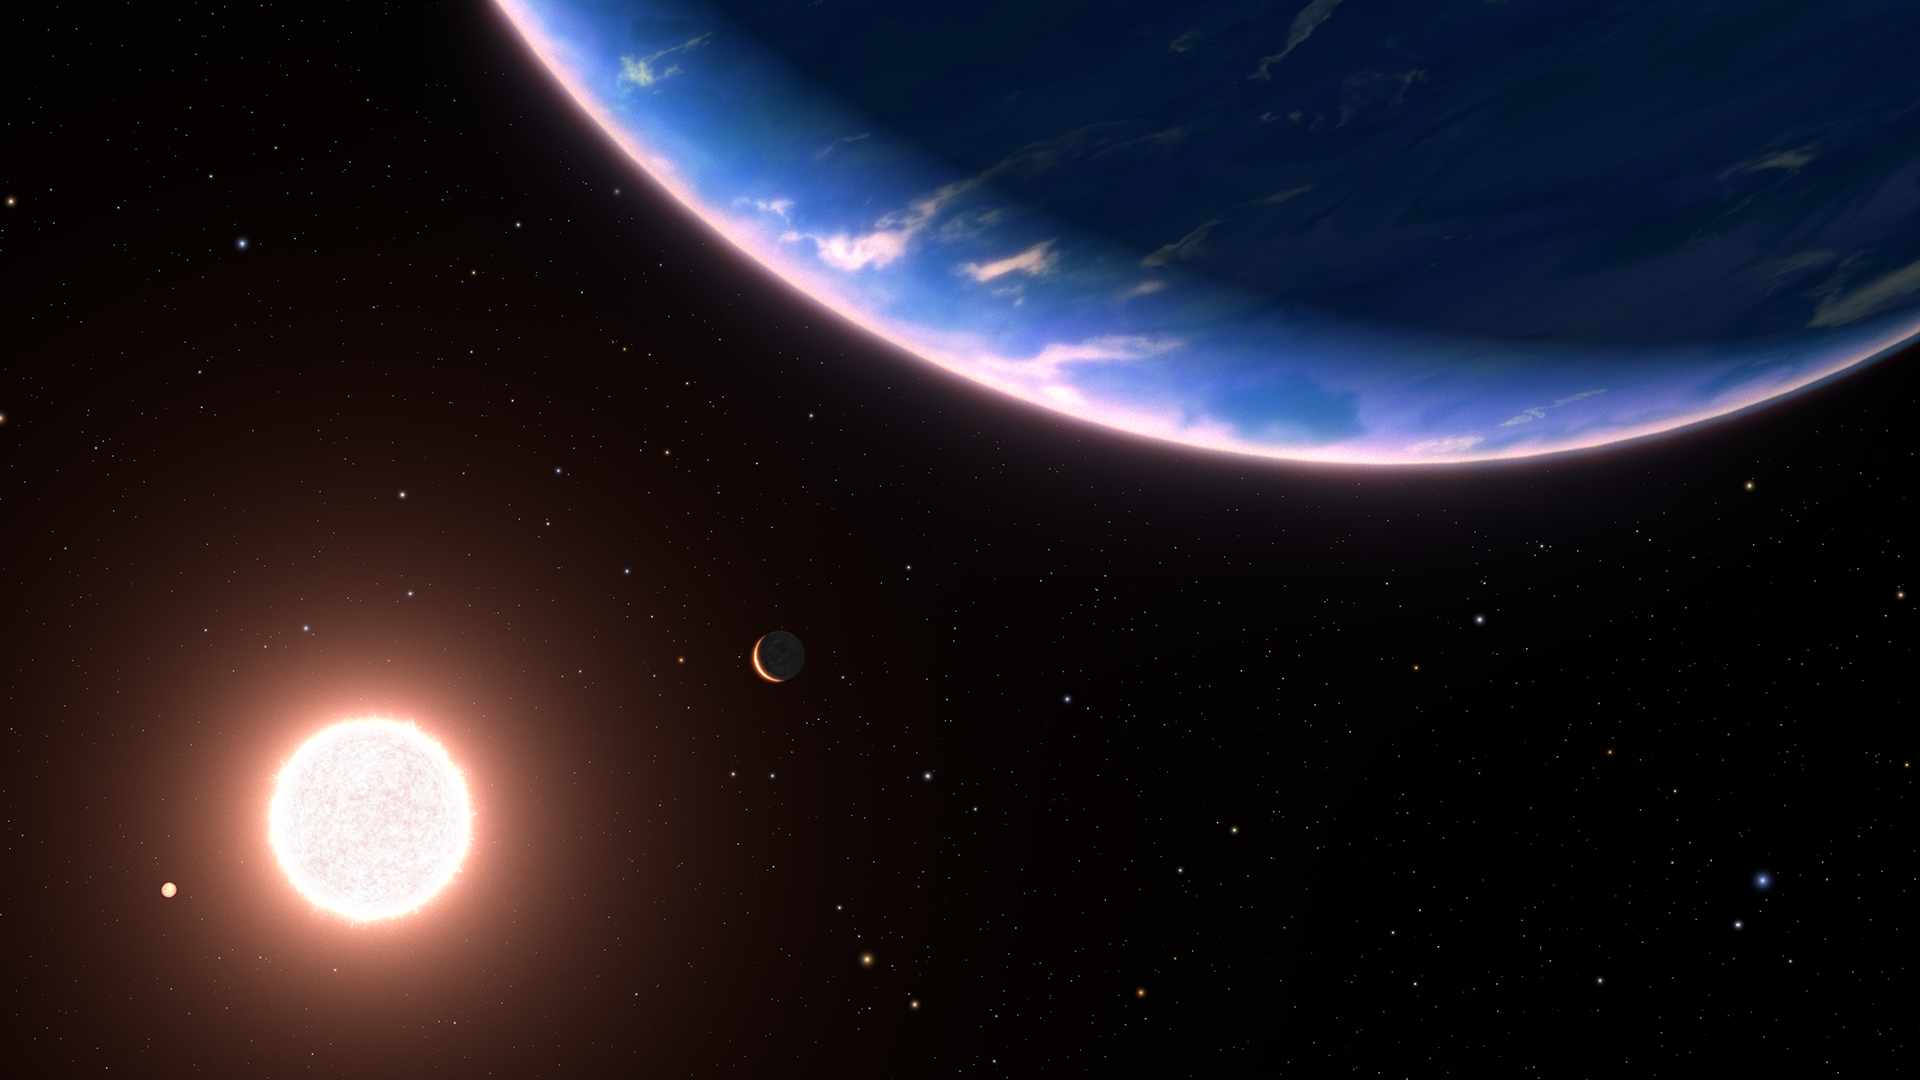 NASA’s Hubble Finds Water Vapor in Small Exoplanet’s Atmosphere